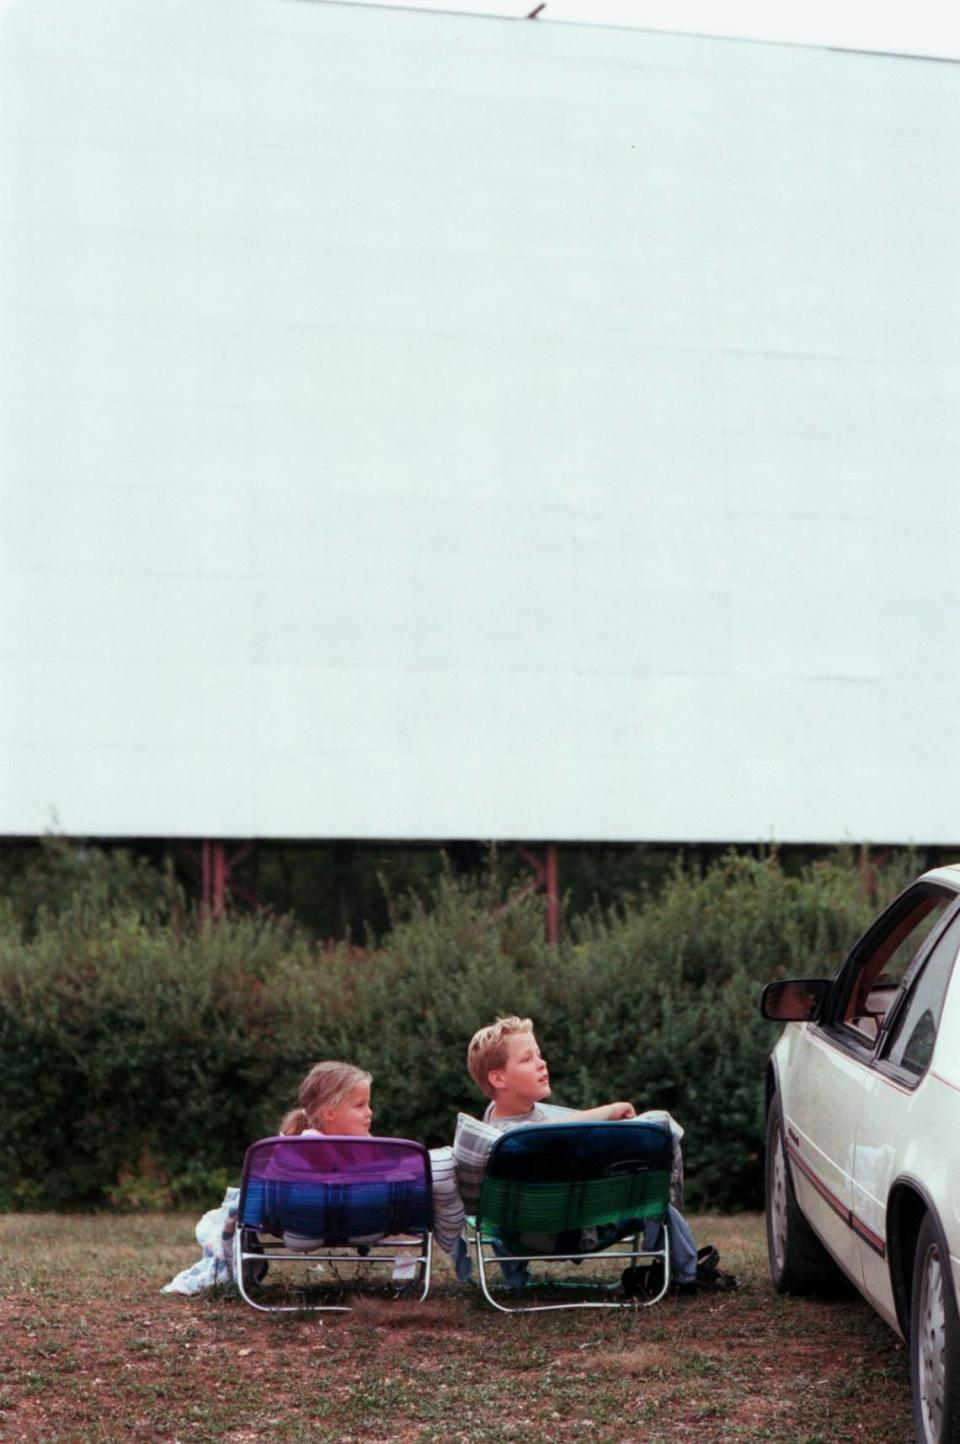 Heather Wance,7, and Sean Wance , 11, of Altoona talk to their parents in the car before watching a movie at the Starlite Drive-In Theatre on Saturday, July 31, 1999.